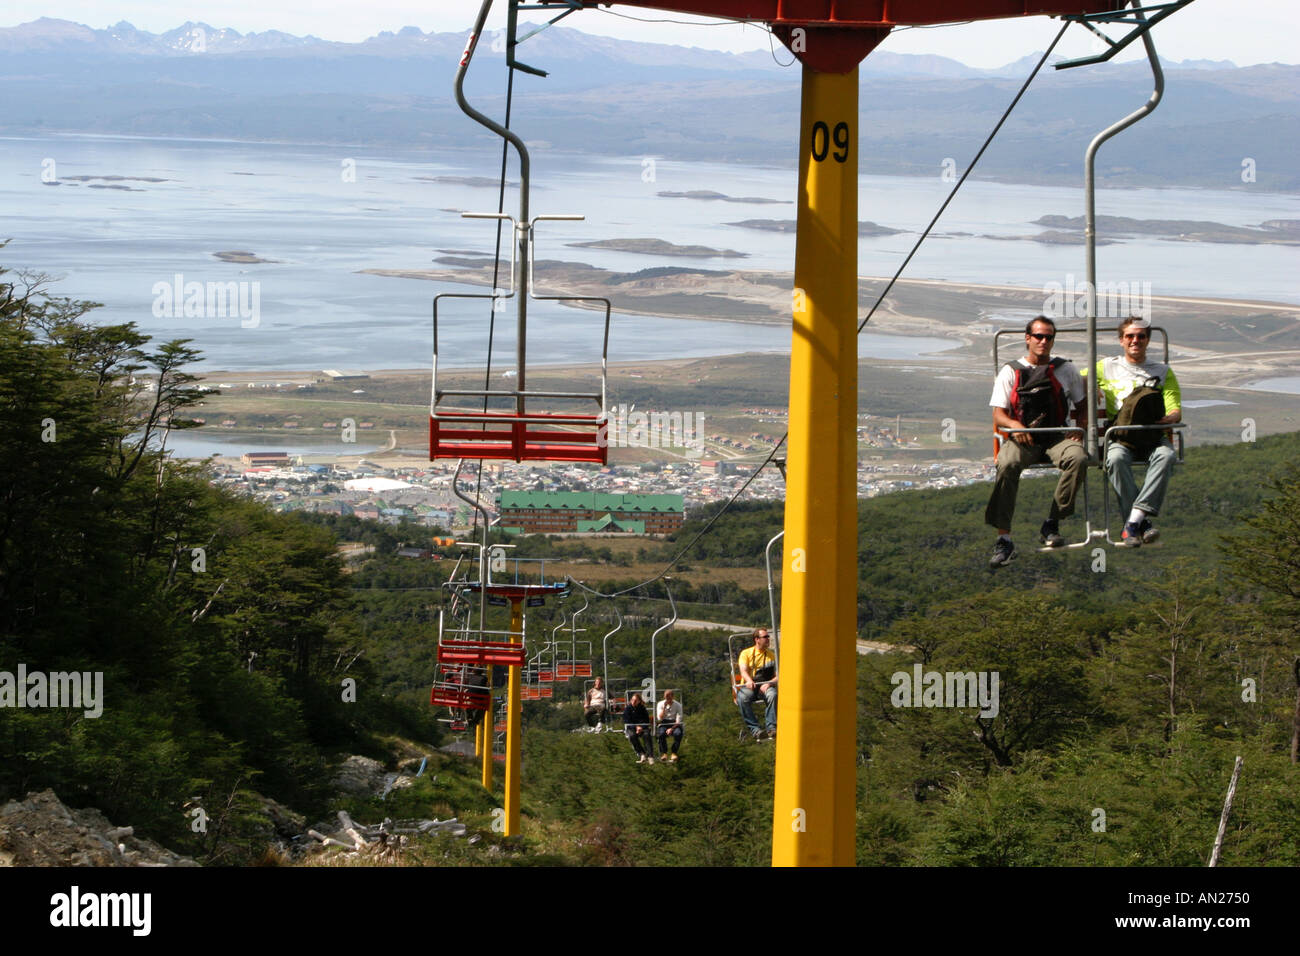 hikers on the chairlift  to the Martial Glacier at Ushuaia Tierra del Fuego Argentina South America Stock Photo